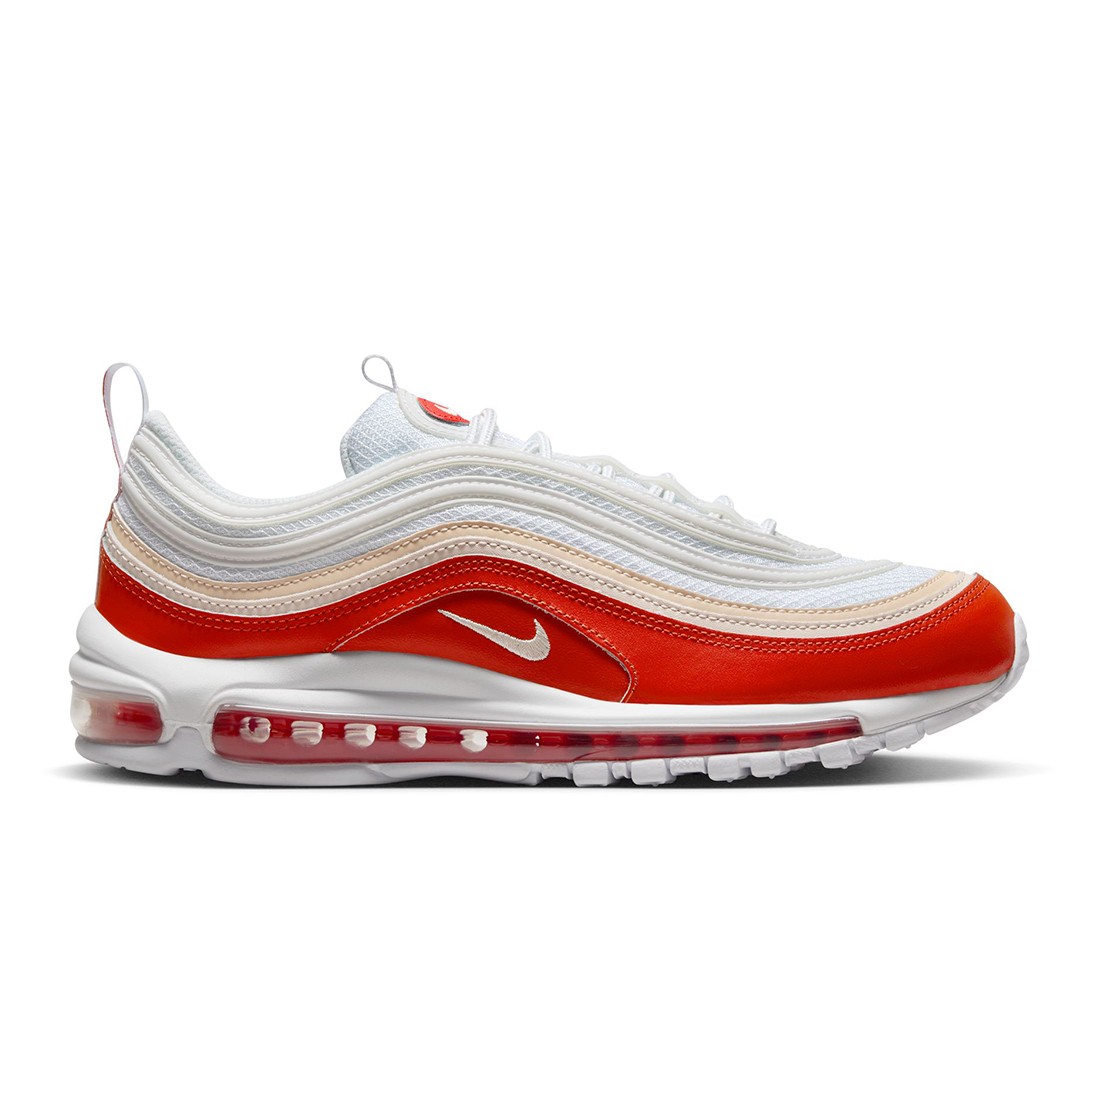 Nike Air Max 97 trainers in white and grey